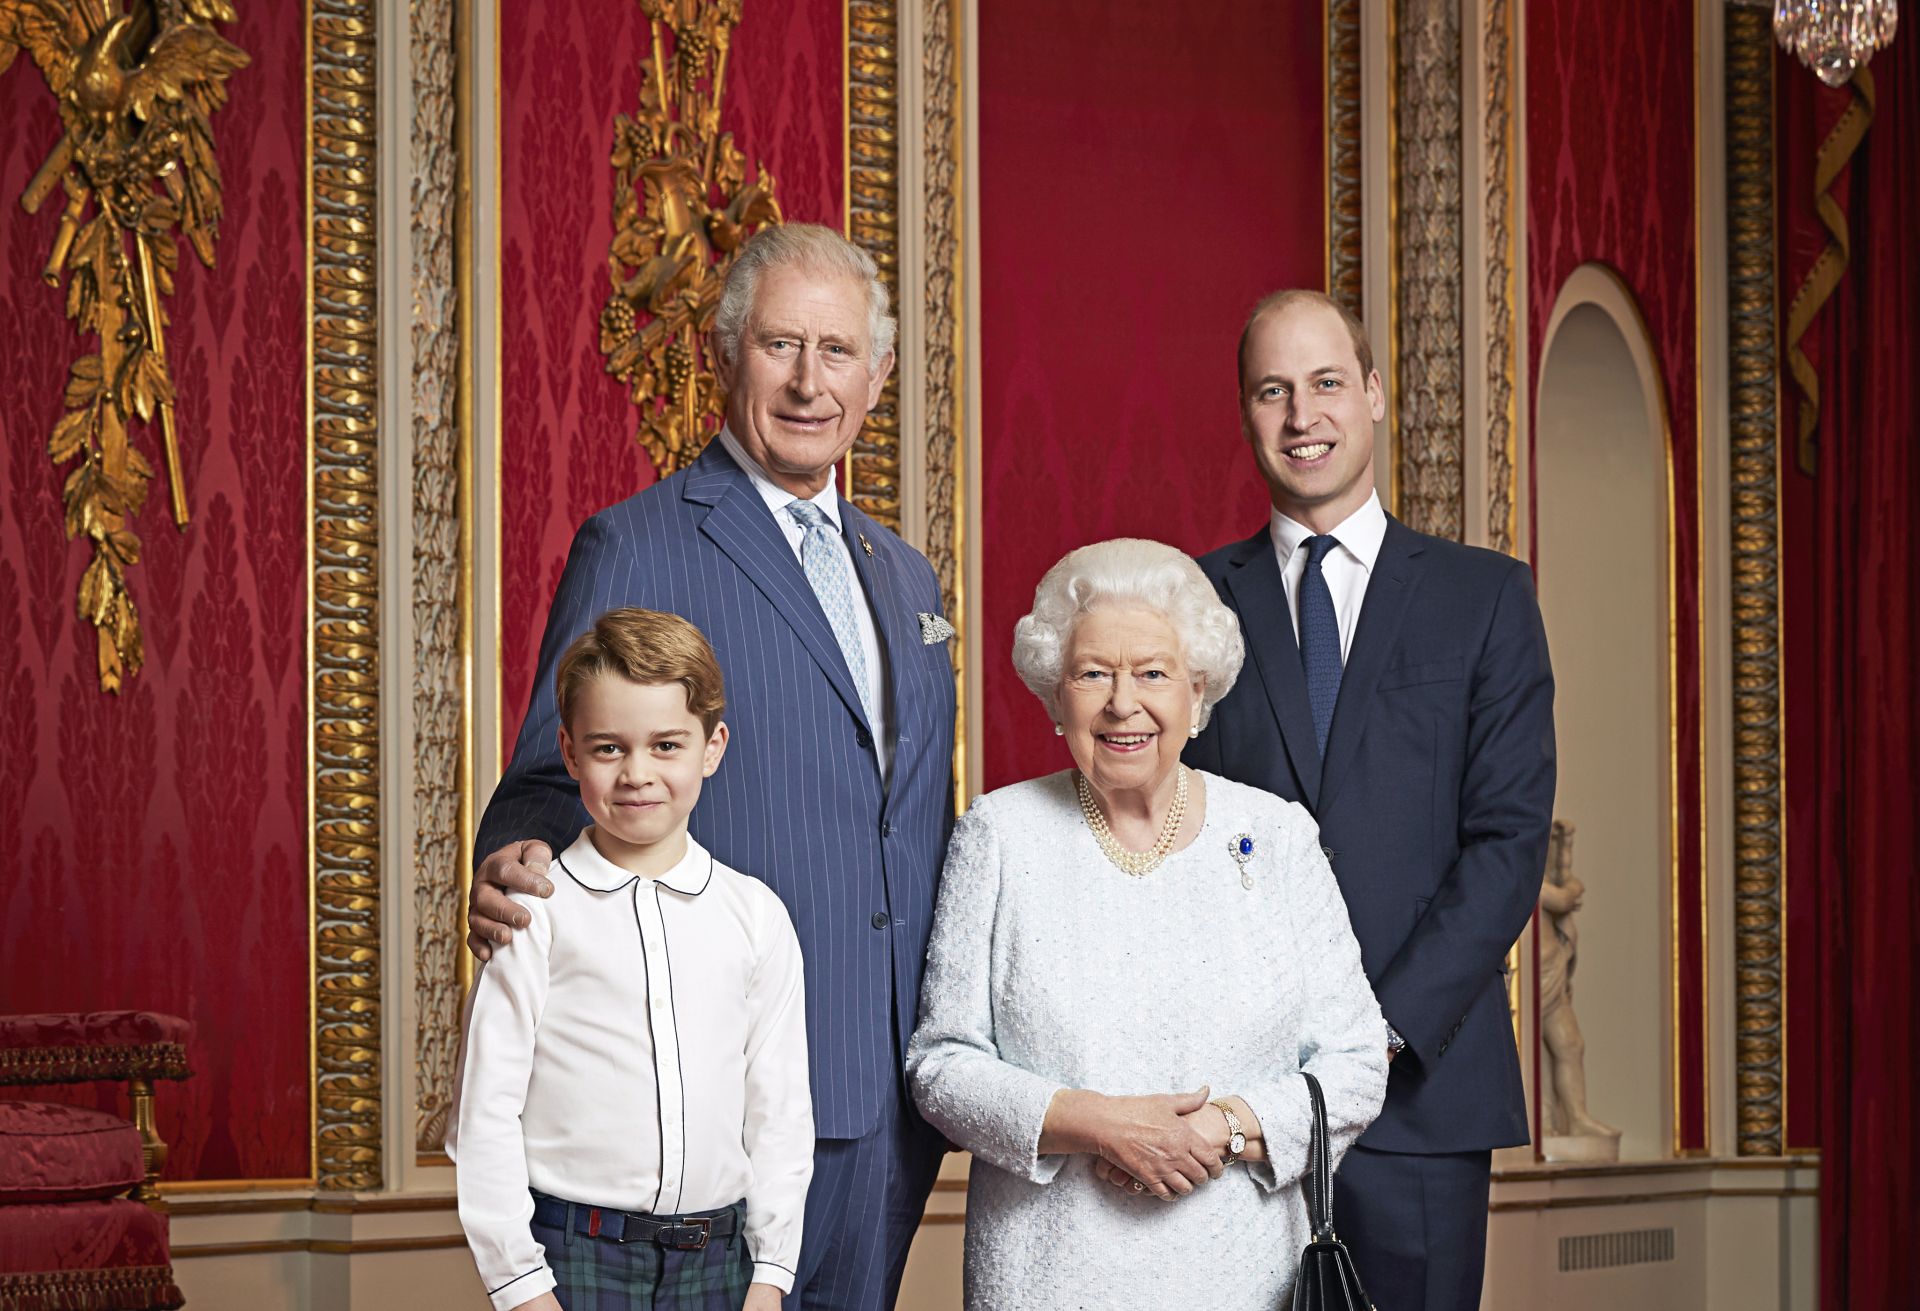 epa08101670 A new portrait dated 18 December 2019 and made available 04 January 2020, showing  Queen Elizabeth II, the Prince of Wales, the Duke of Cambridge and Prince George, released to mark the start of a new decade. This is only the second time such a portrait has been issued. The first was released in April 2016 to celebrate Her Majesty's 90th birthday. The portrait was then used on special commemorative stamps released by the Royal Mail. This new portrait was taken by the same photographer, Ranald Mackechnie in the Throne Room at Buckingham Palace. 

RESTRICTIONS APPLY - Editorial use only, no commercial use whatsoever of the photograph (including any use in merchandising, advertising or any other non-editorial use); not for use after 15th January 2020 without prior permission from Royal Communications. The photograph must not be digitally enhanced, manipulated or modified in any manner or form and must include all of the individuals in the photograph when published.  EPA/RANALD MACKECHNIE HANDOUT MANDATORY CREDIT: RANALD MACKECHNIE / PRESS ASSOCIATION IMAGES  EDITORIAL USE ONLY/NO SALES